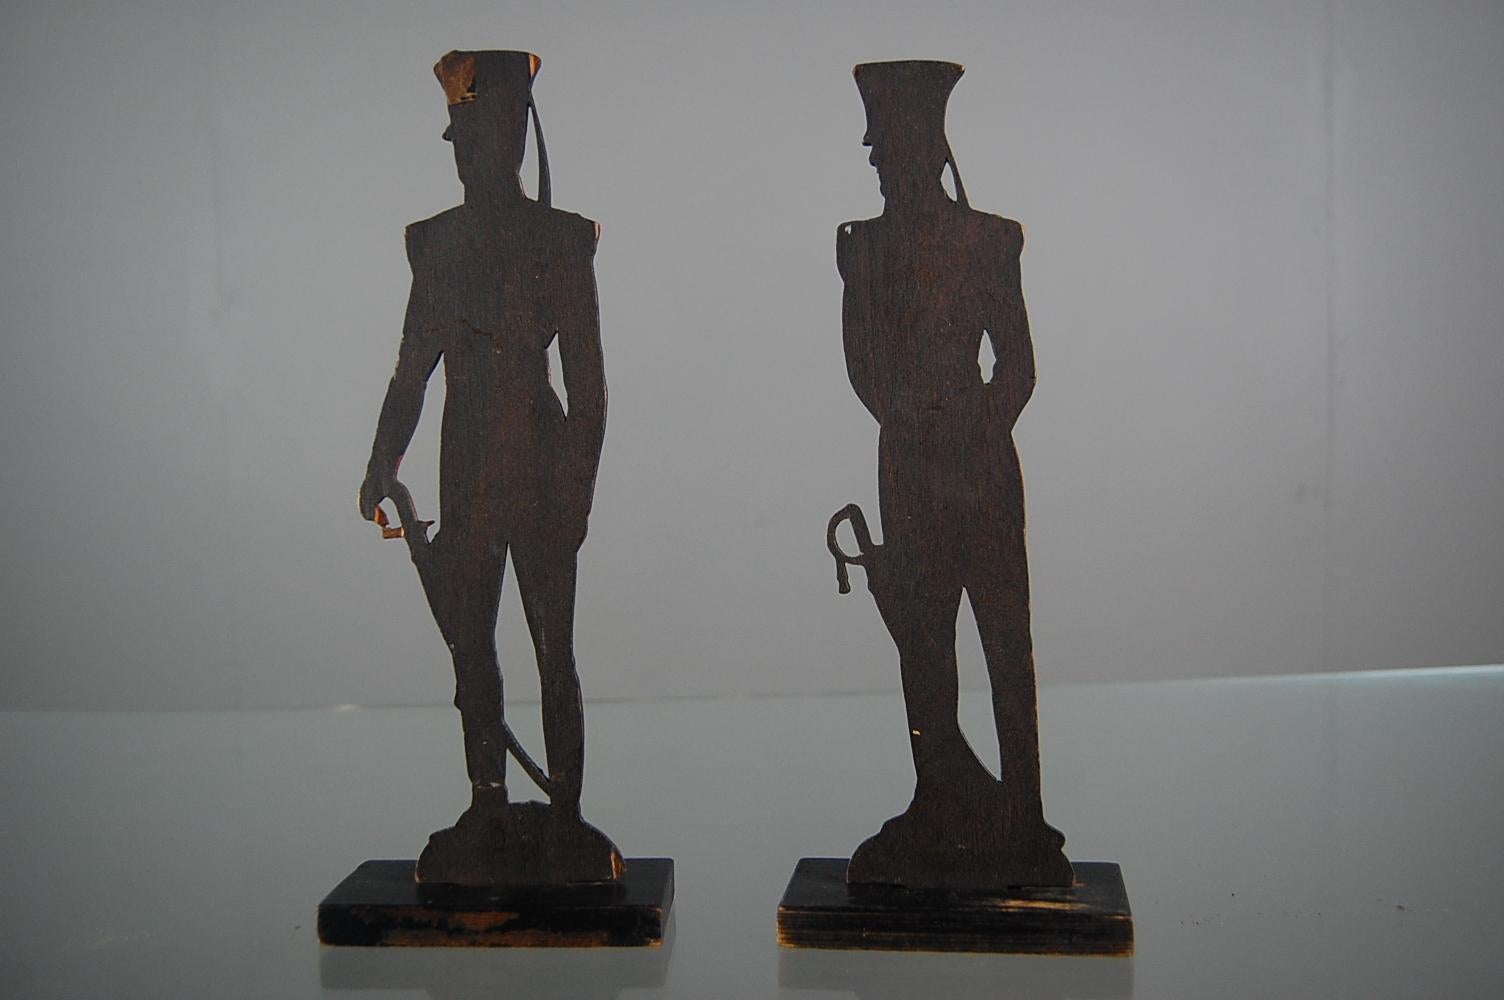 A delightful pair of wooden painted soldiers by Lt Ernest Vernon Howell, Serving British officer from Sep 1917 - Jun1920. Having been invalided he began painting these wooden figures, predominantly for museums, illustrating British military uniforms